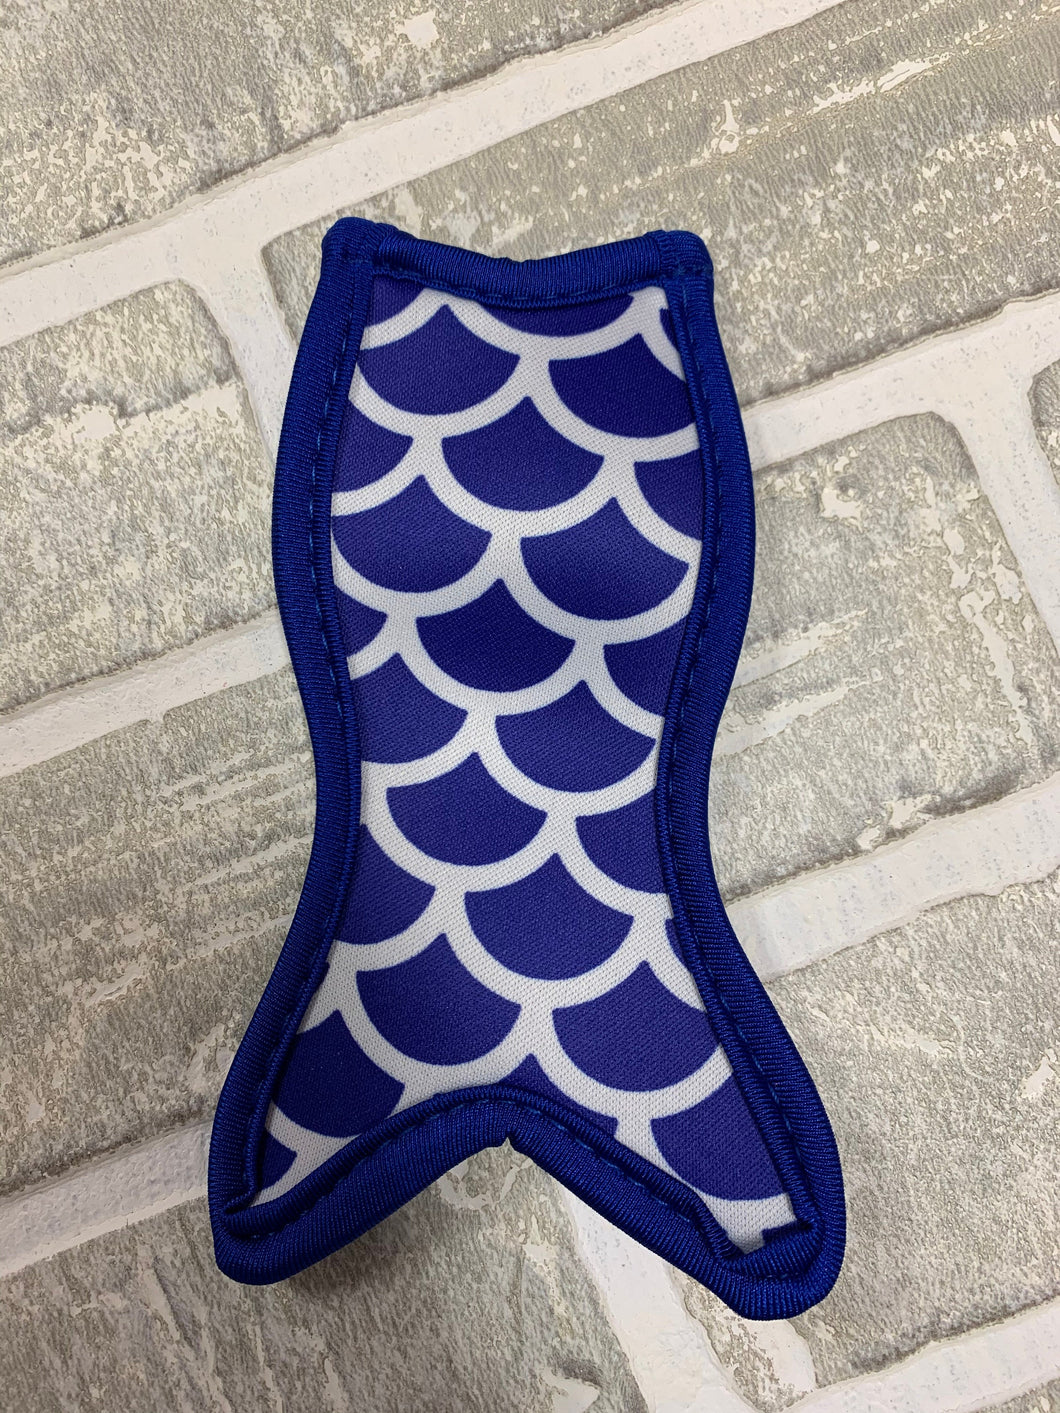 Blue and white mermaid tail popsicle holder blanks